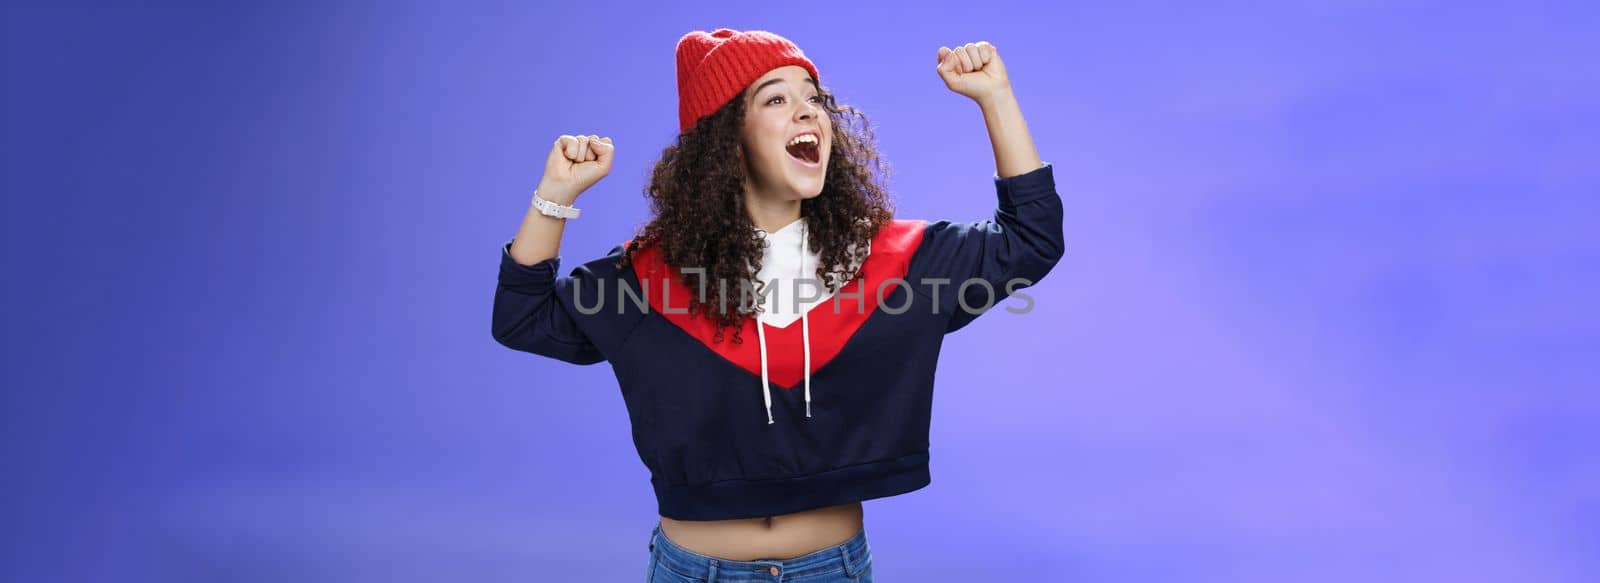 Happy playful and carefree woman yelling out loud tell world great news looking left amused and delighted as shouting positive words raising hands in triumph, cheering for team, wearing hat.